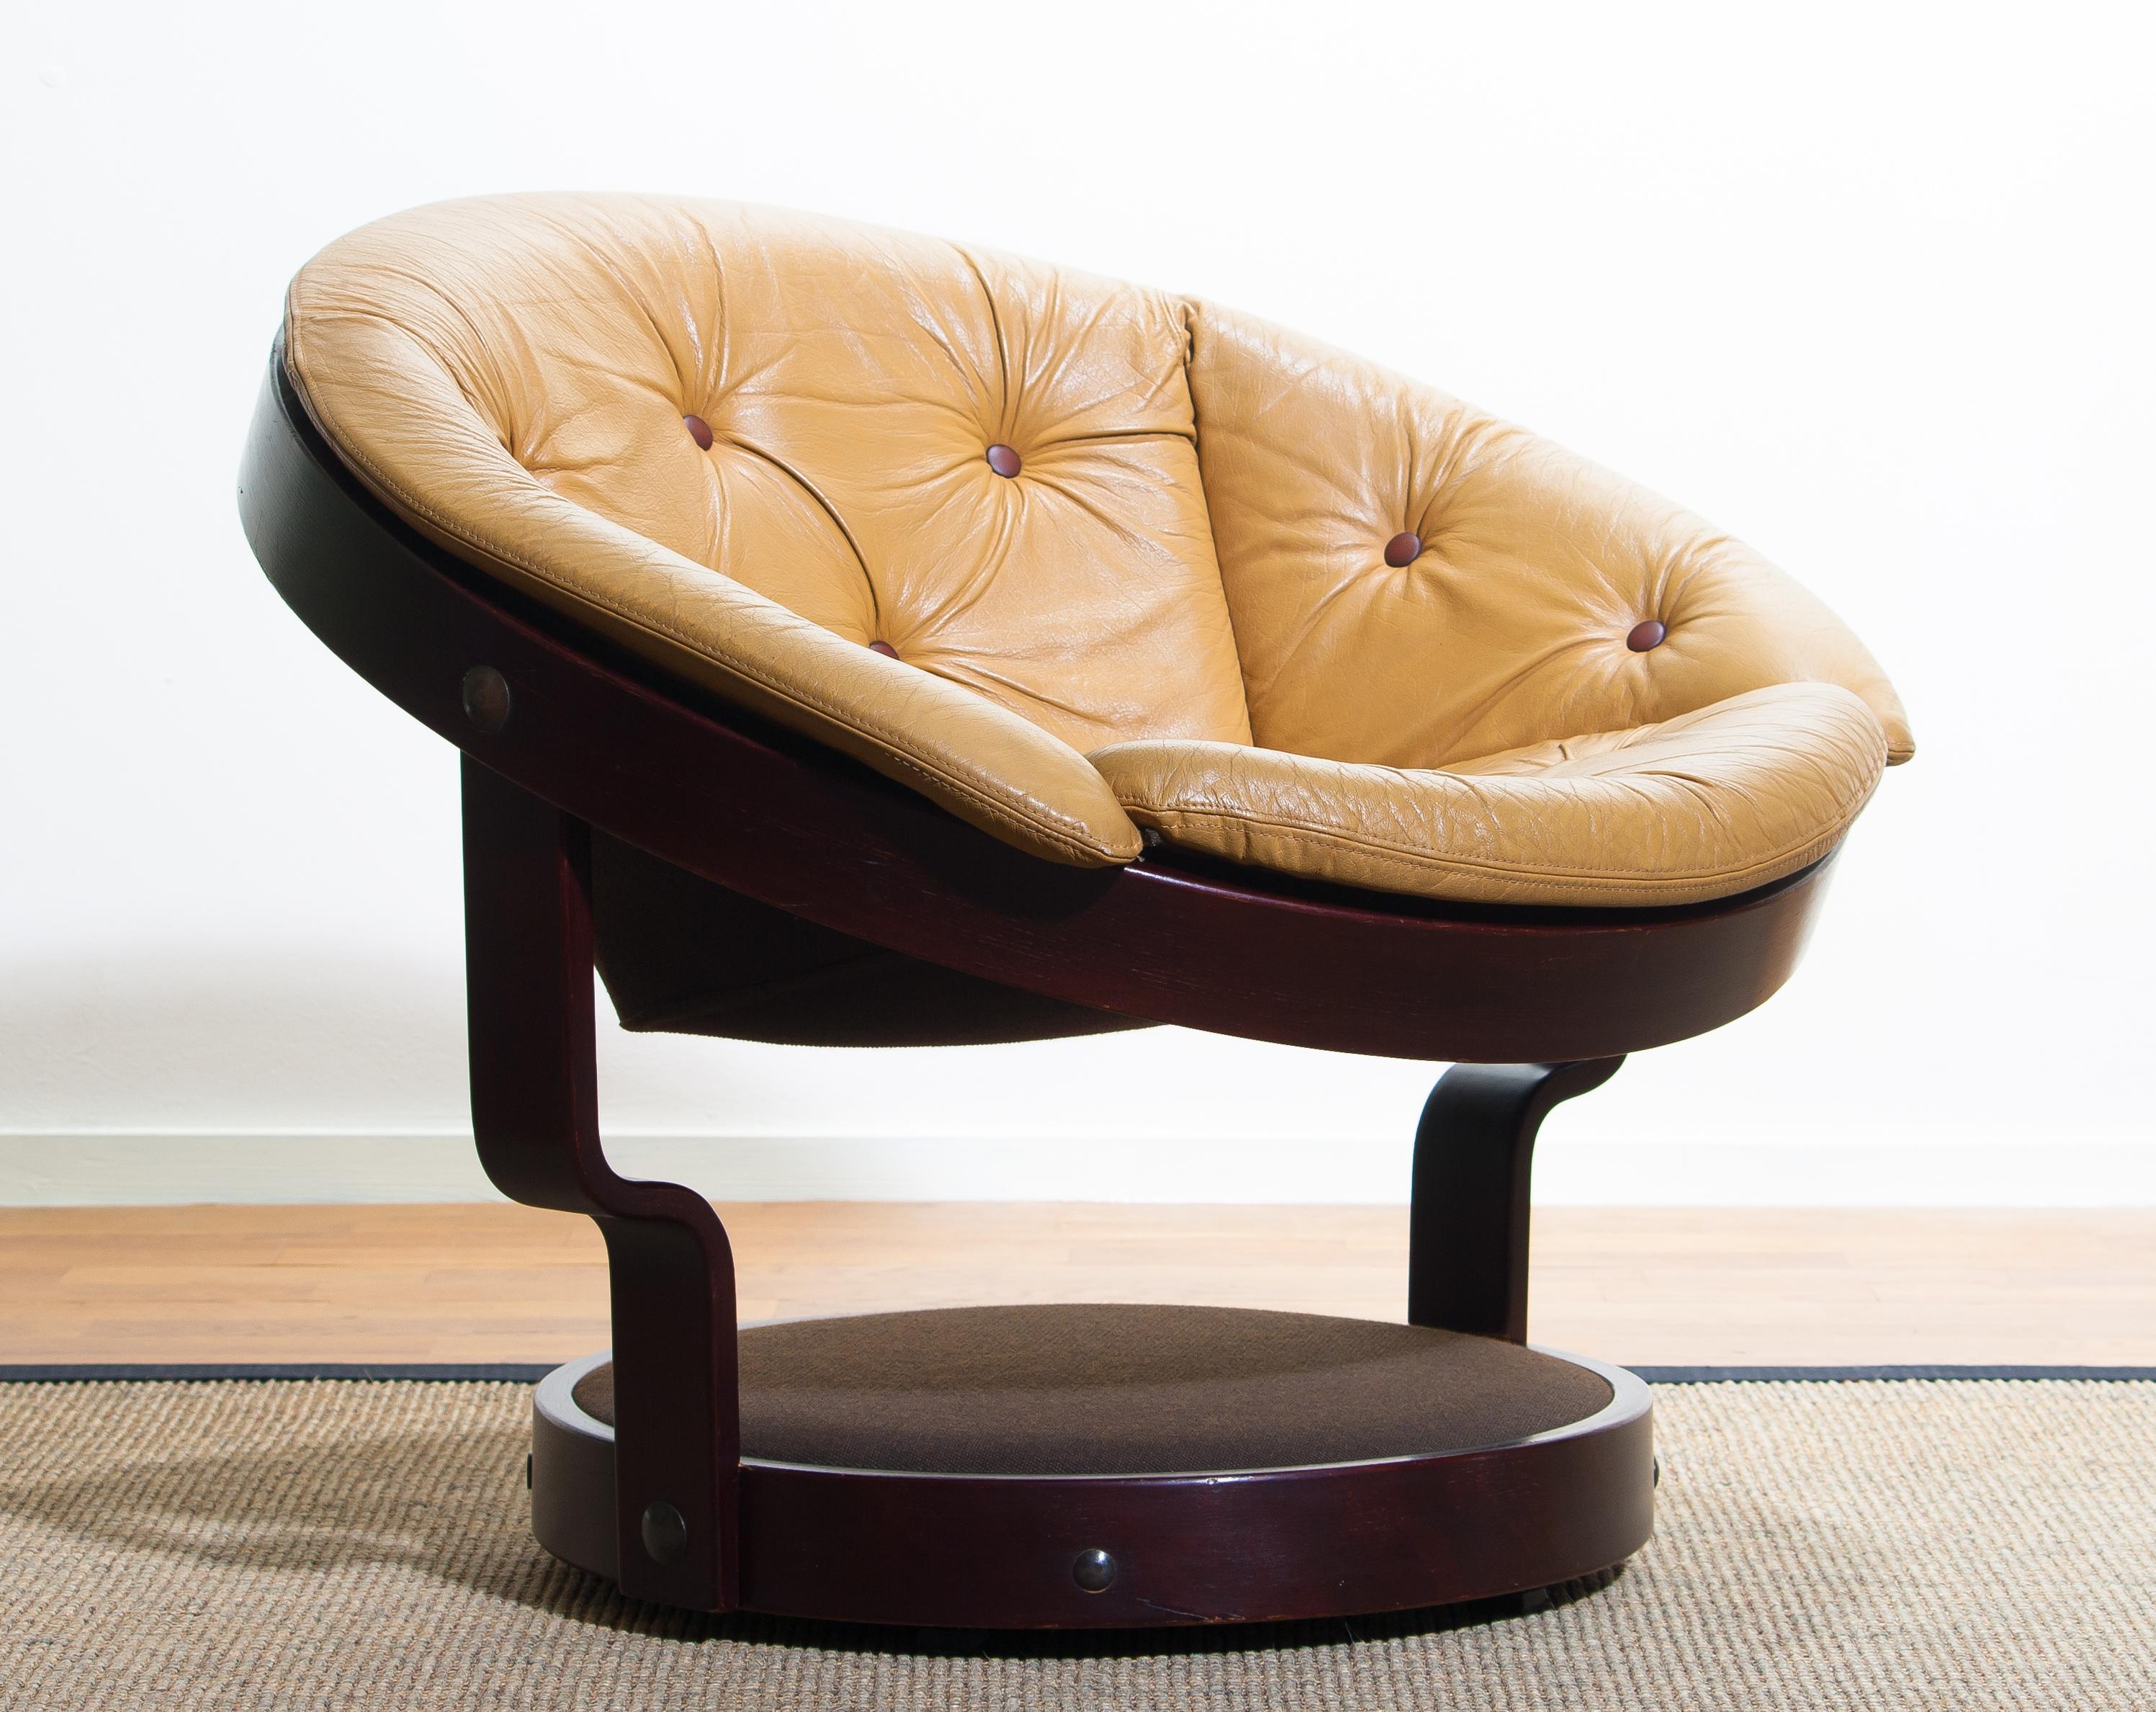 Beautiful circle shaped easy / lounge chair by Oddmund Vad for VAD Trevarefabrikk AS from Norway.
Designed in the 1970s.
This chair is in good condition.